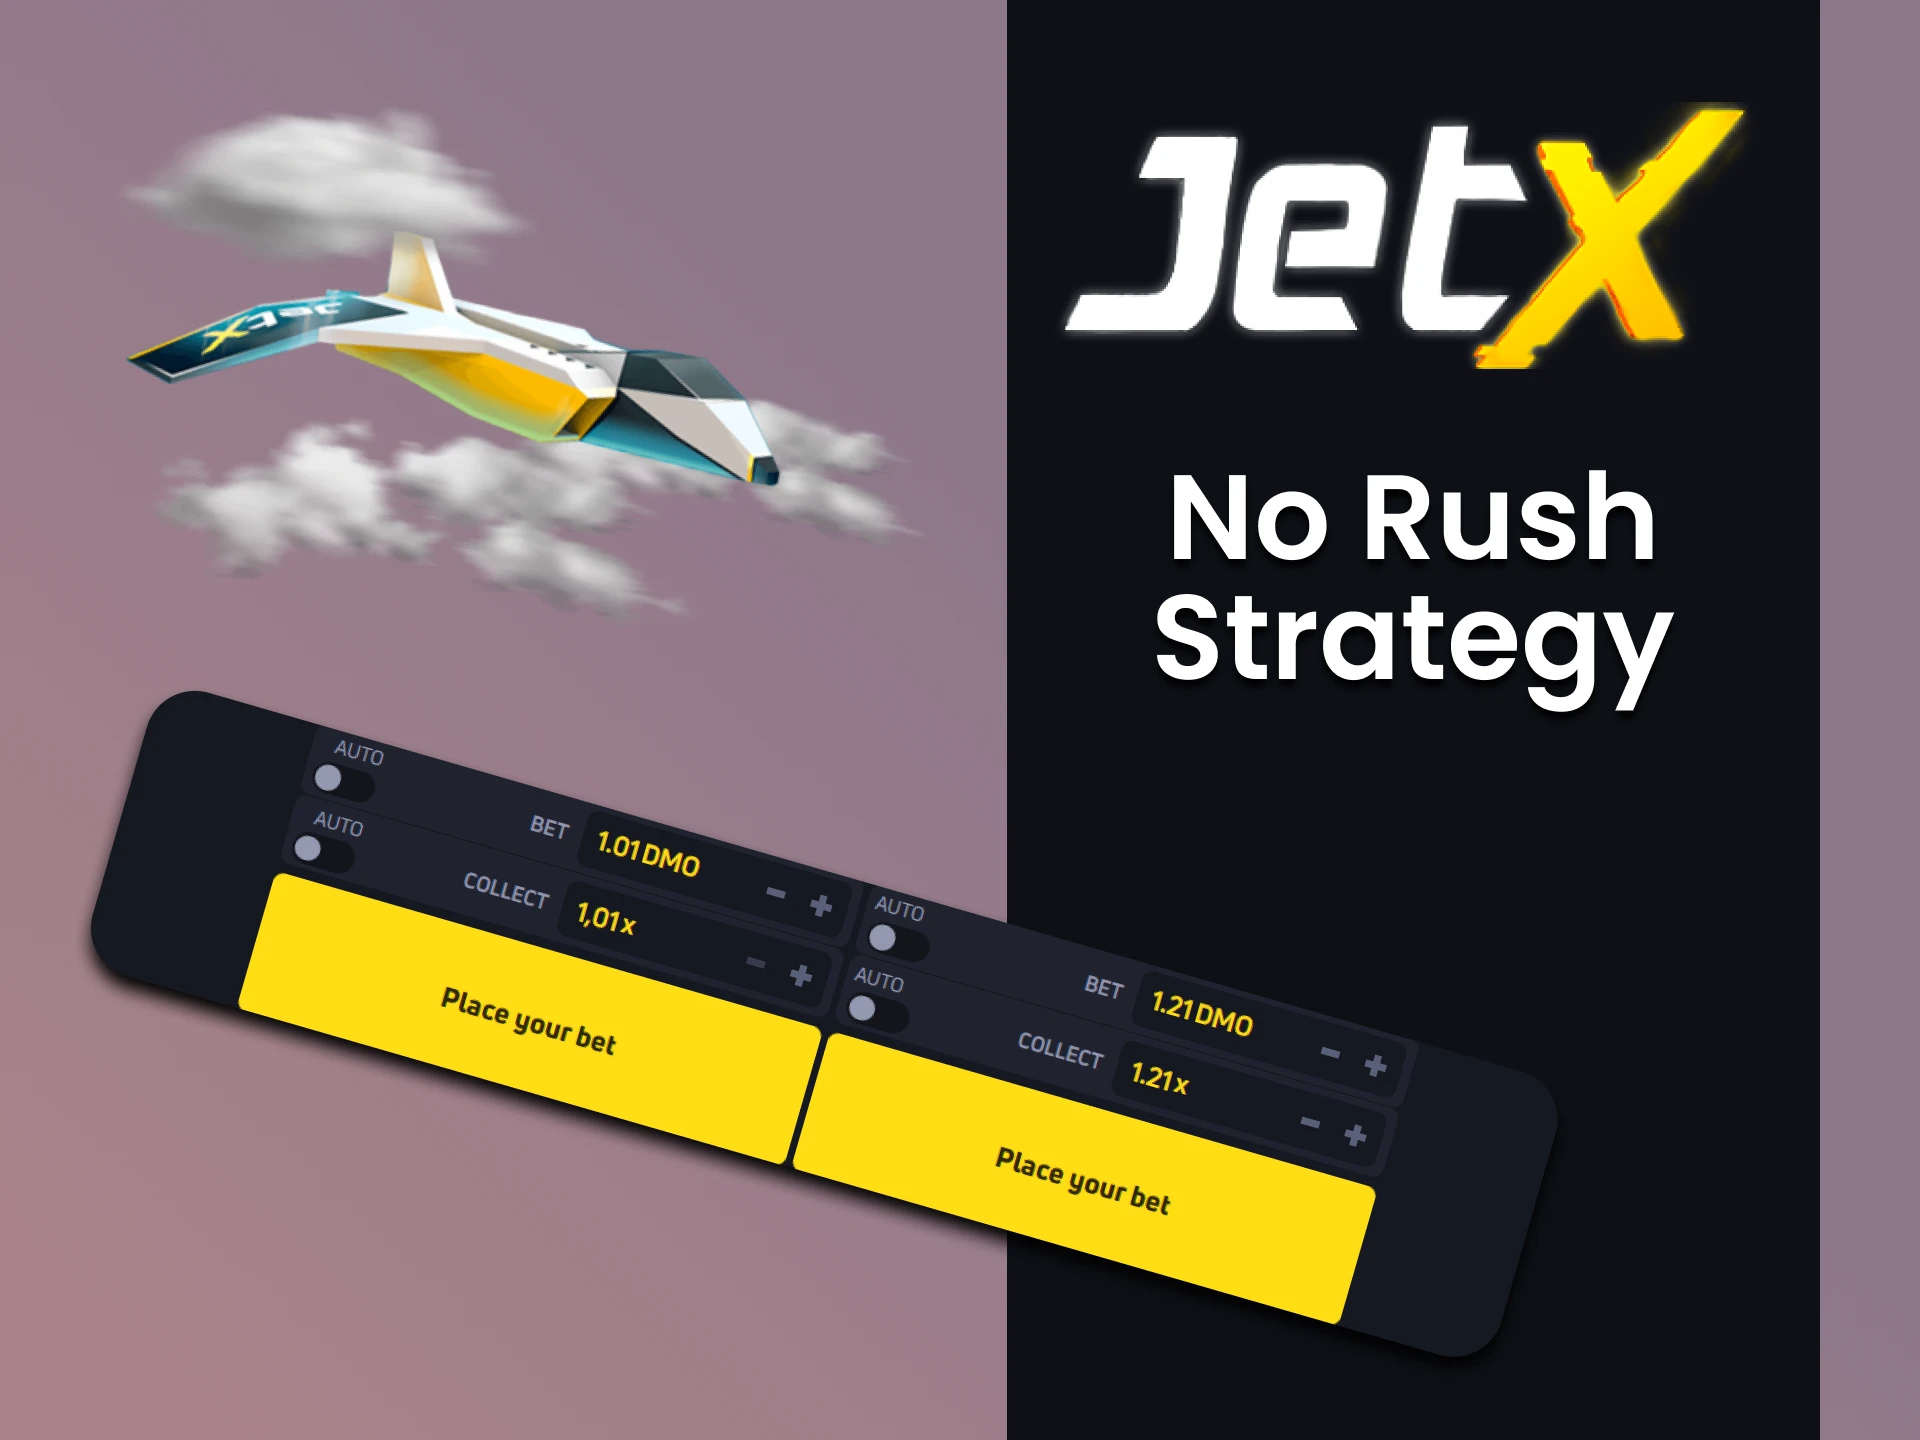 The No Rush strategy will lead you to victory in the JetX game.